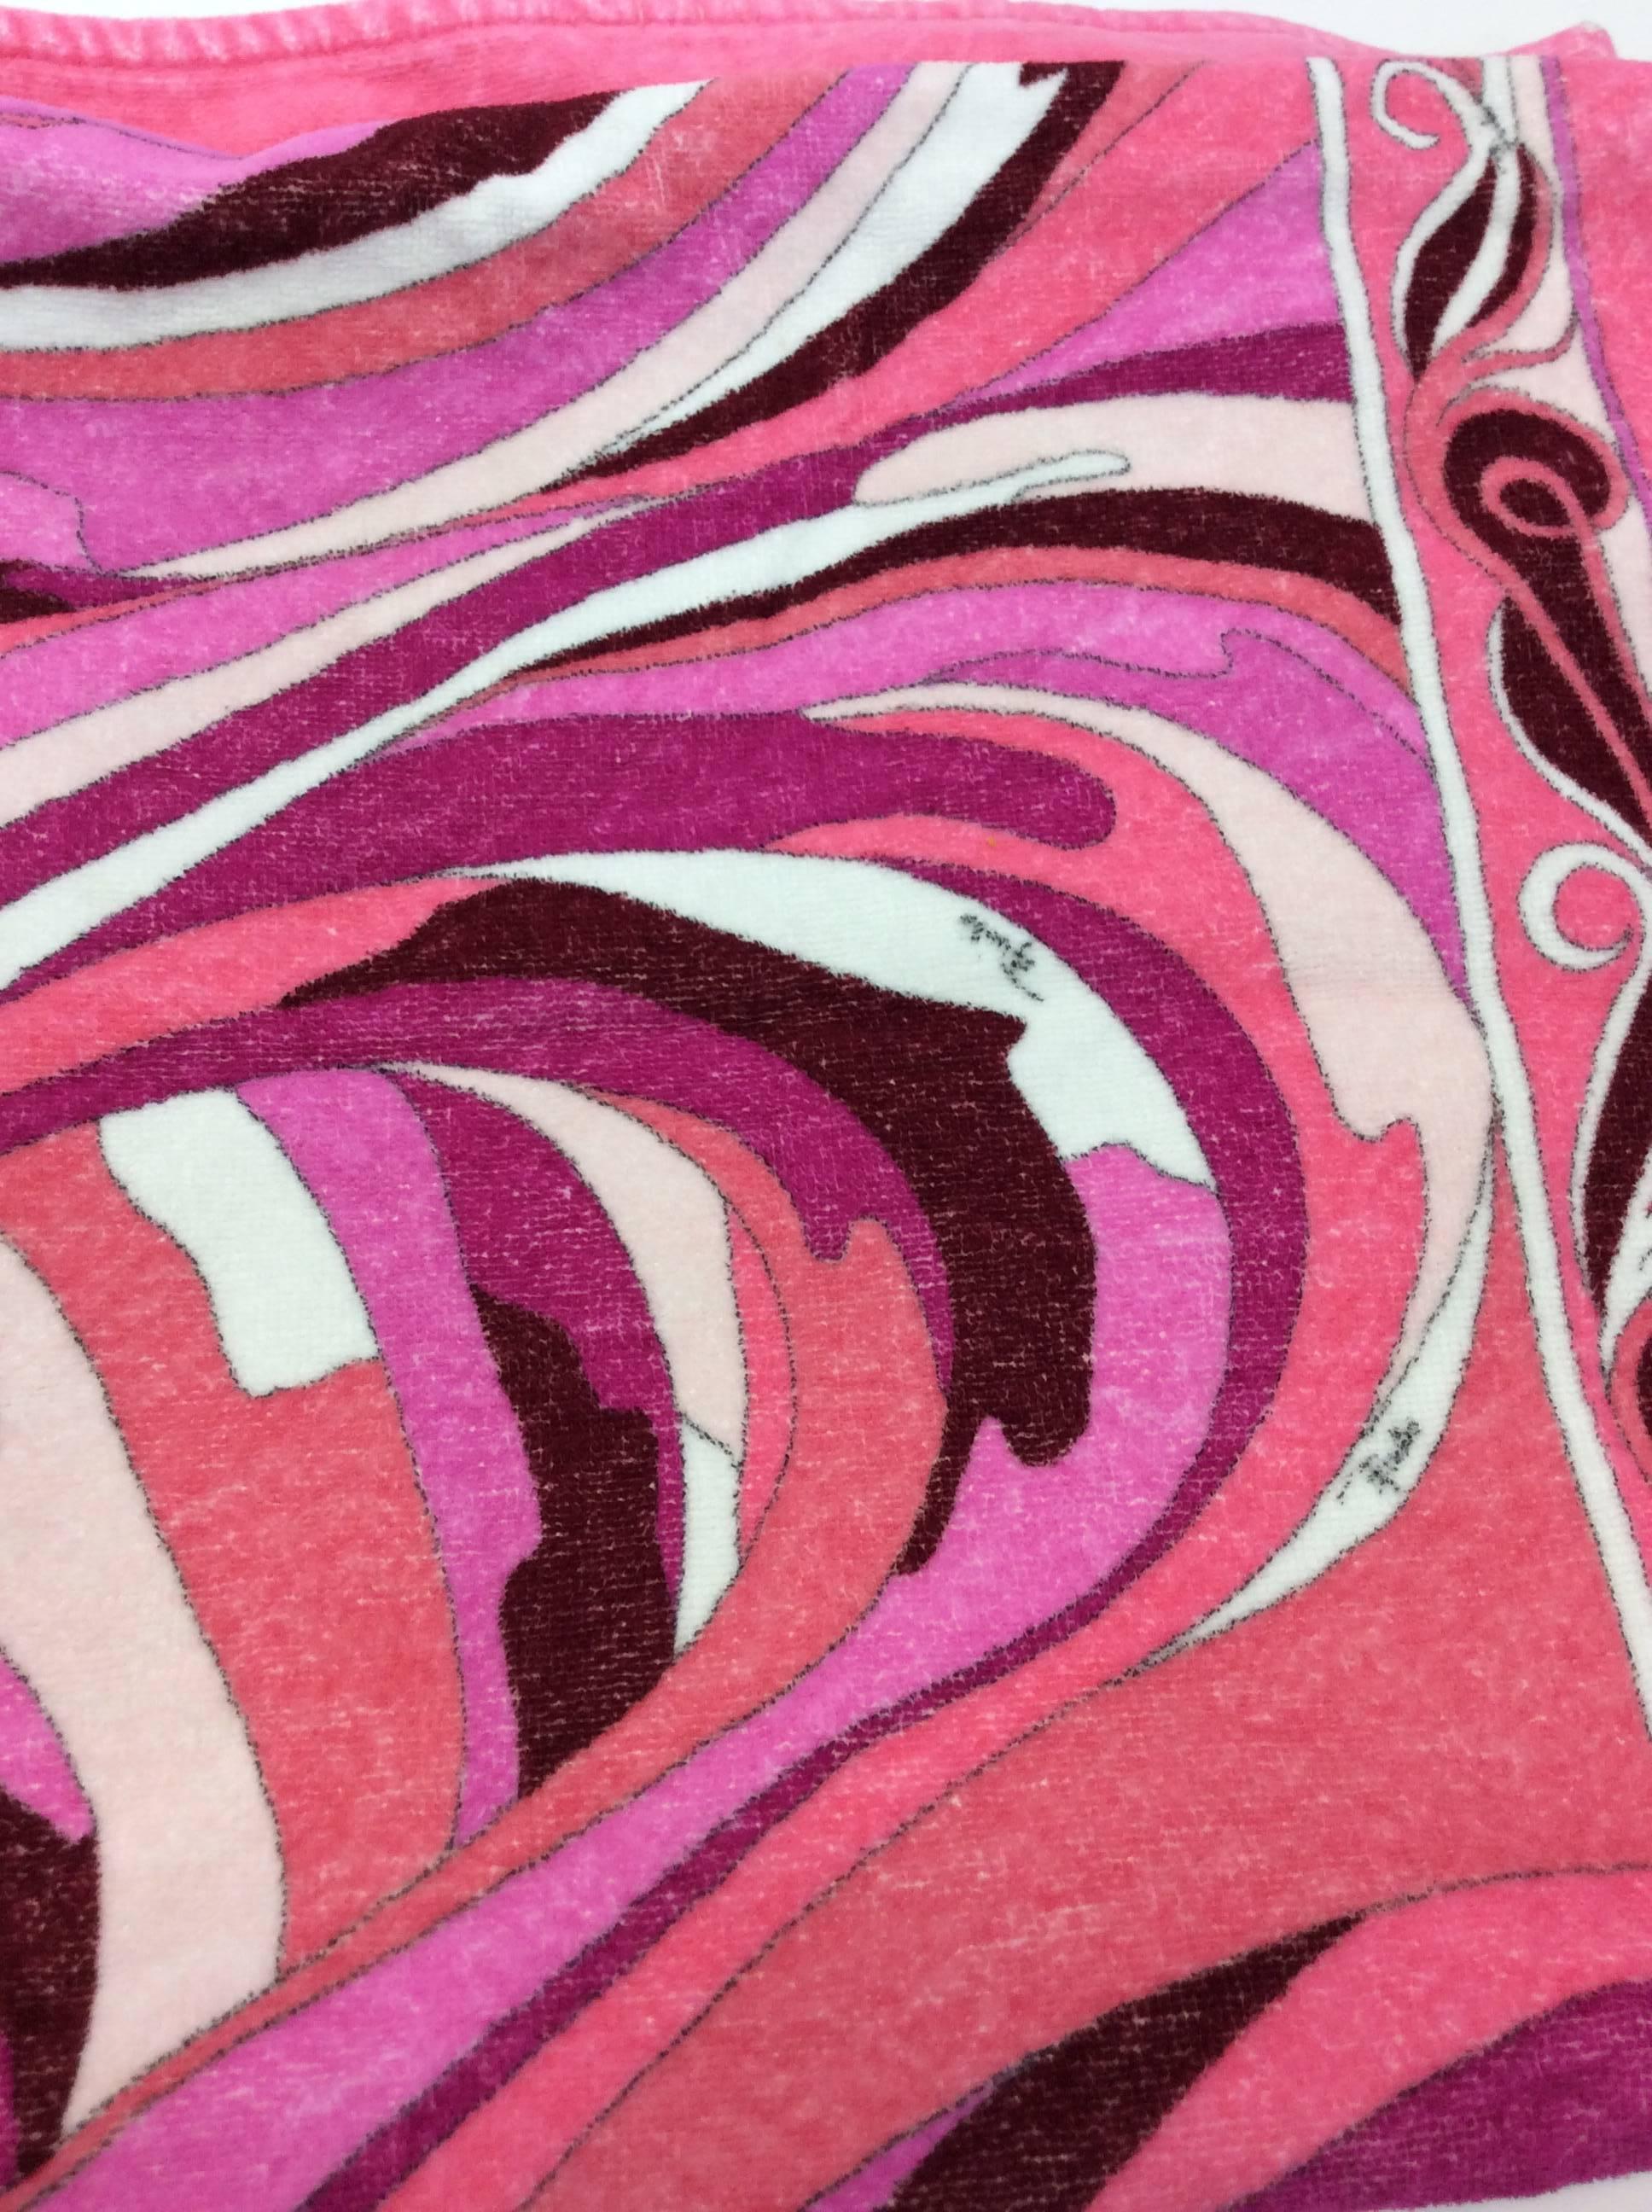 Pucci Pink Printed Beach Towel In Excellent Condition For Sale In Narberth, PA